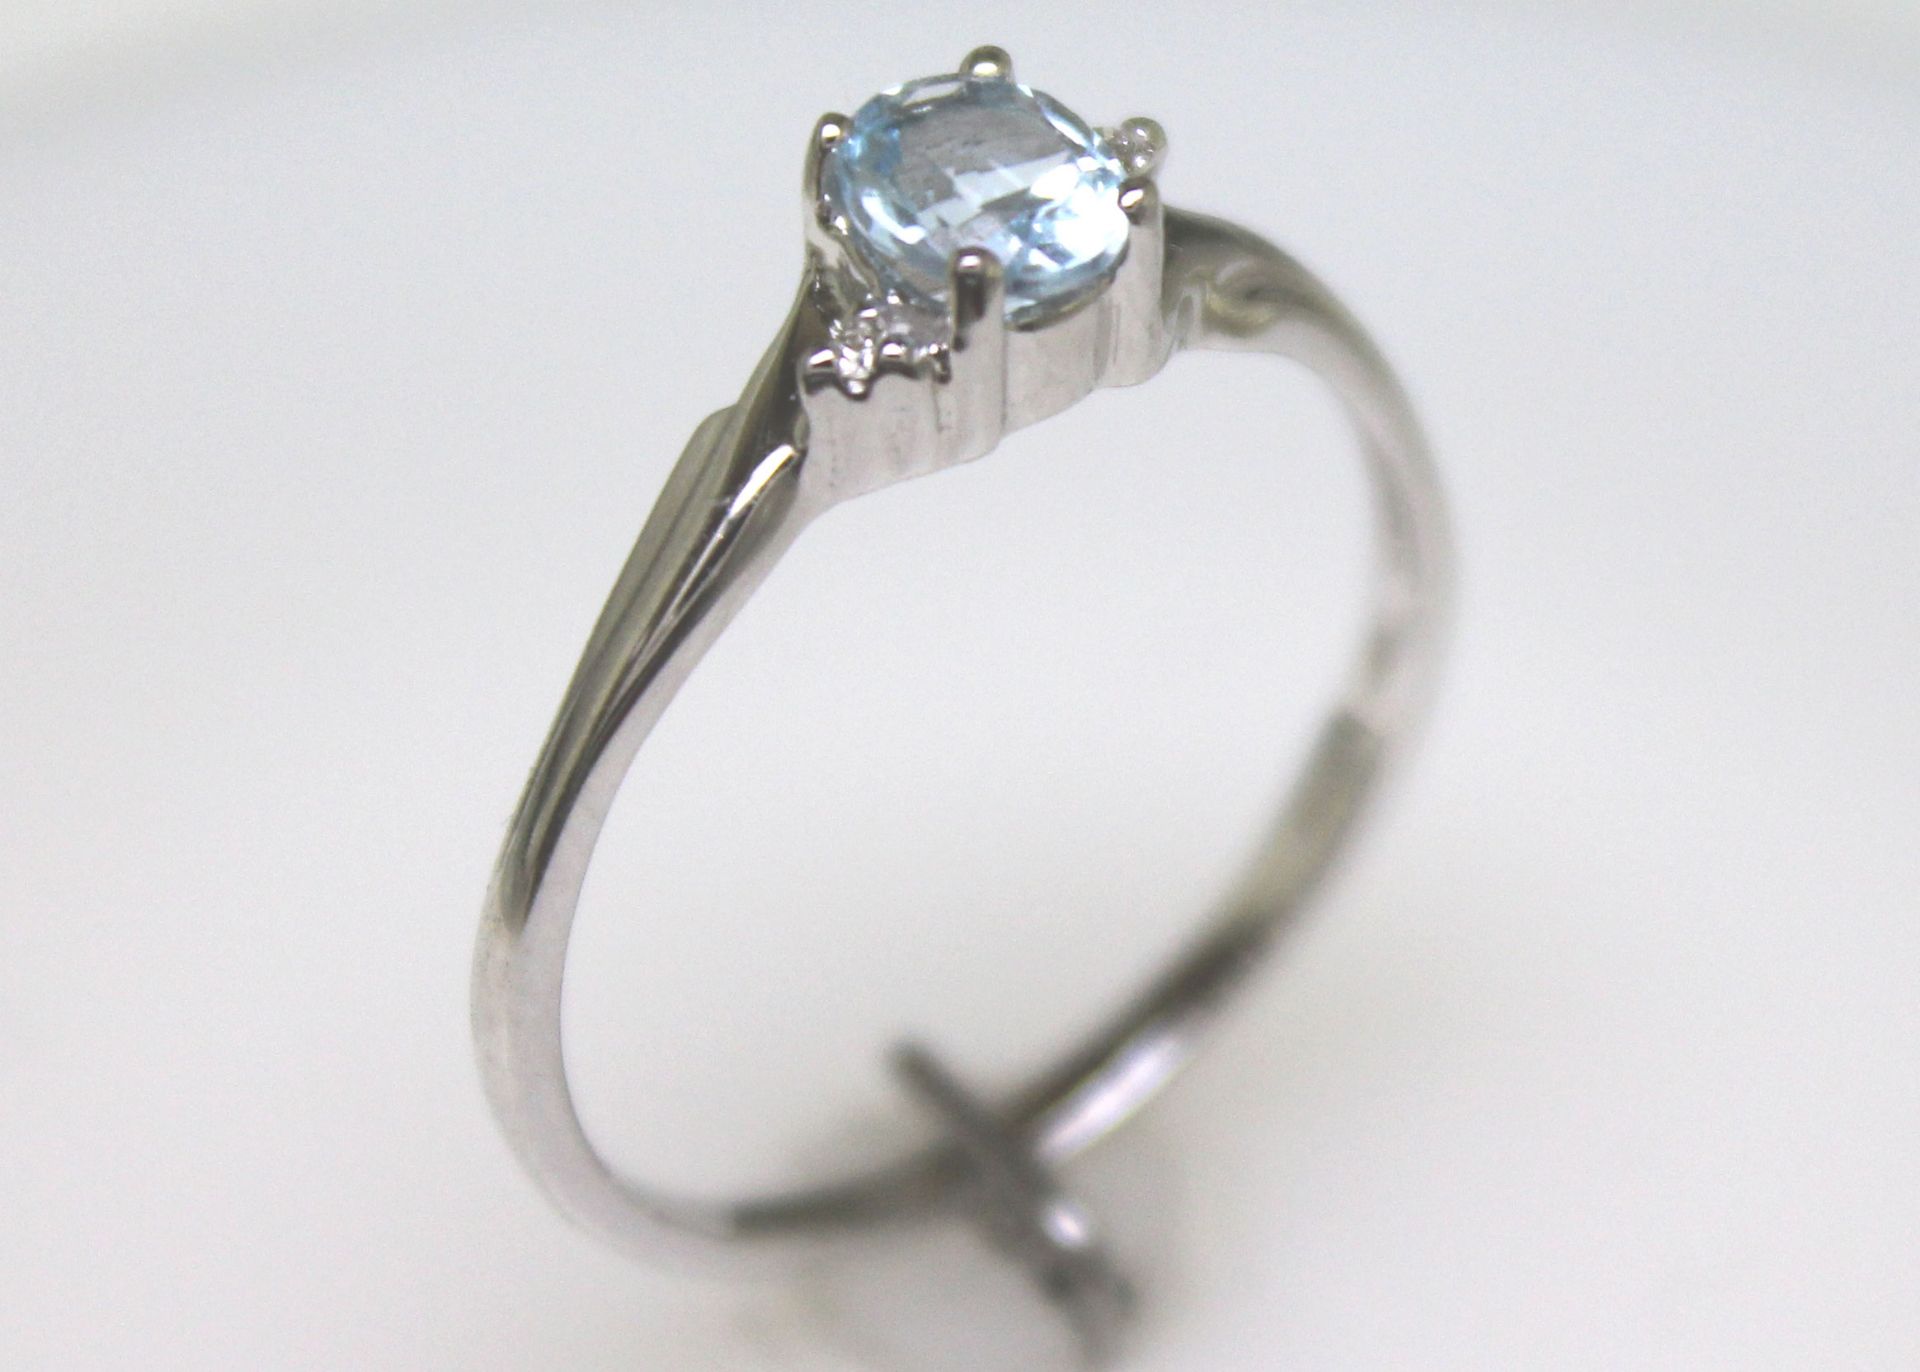 9ct White Gold Diamond and Blue Topaz Ring 0.01 Carats - Valued by GIE £755.00 - This ring - Image 8 of 9